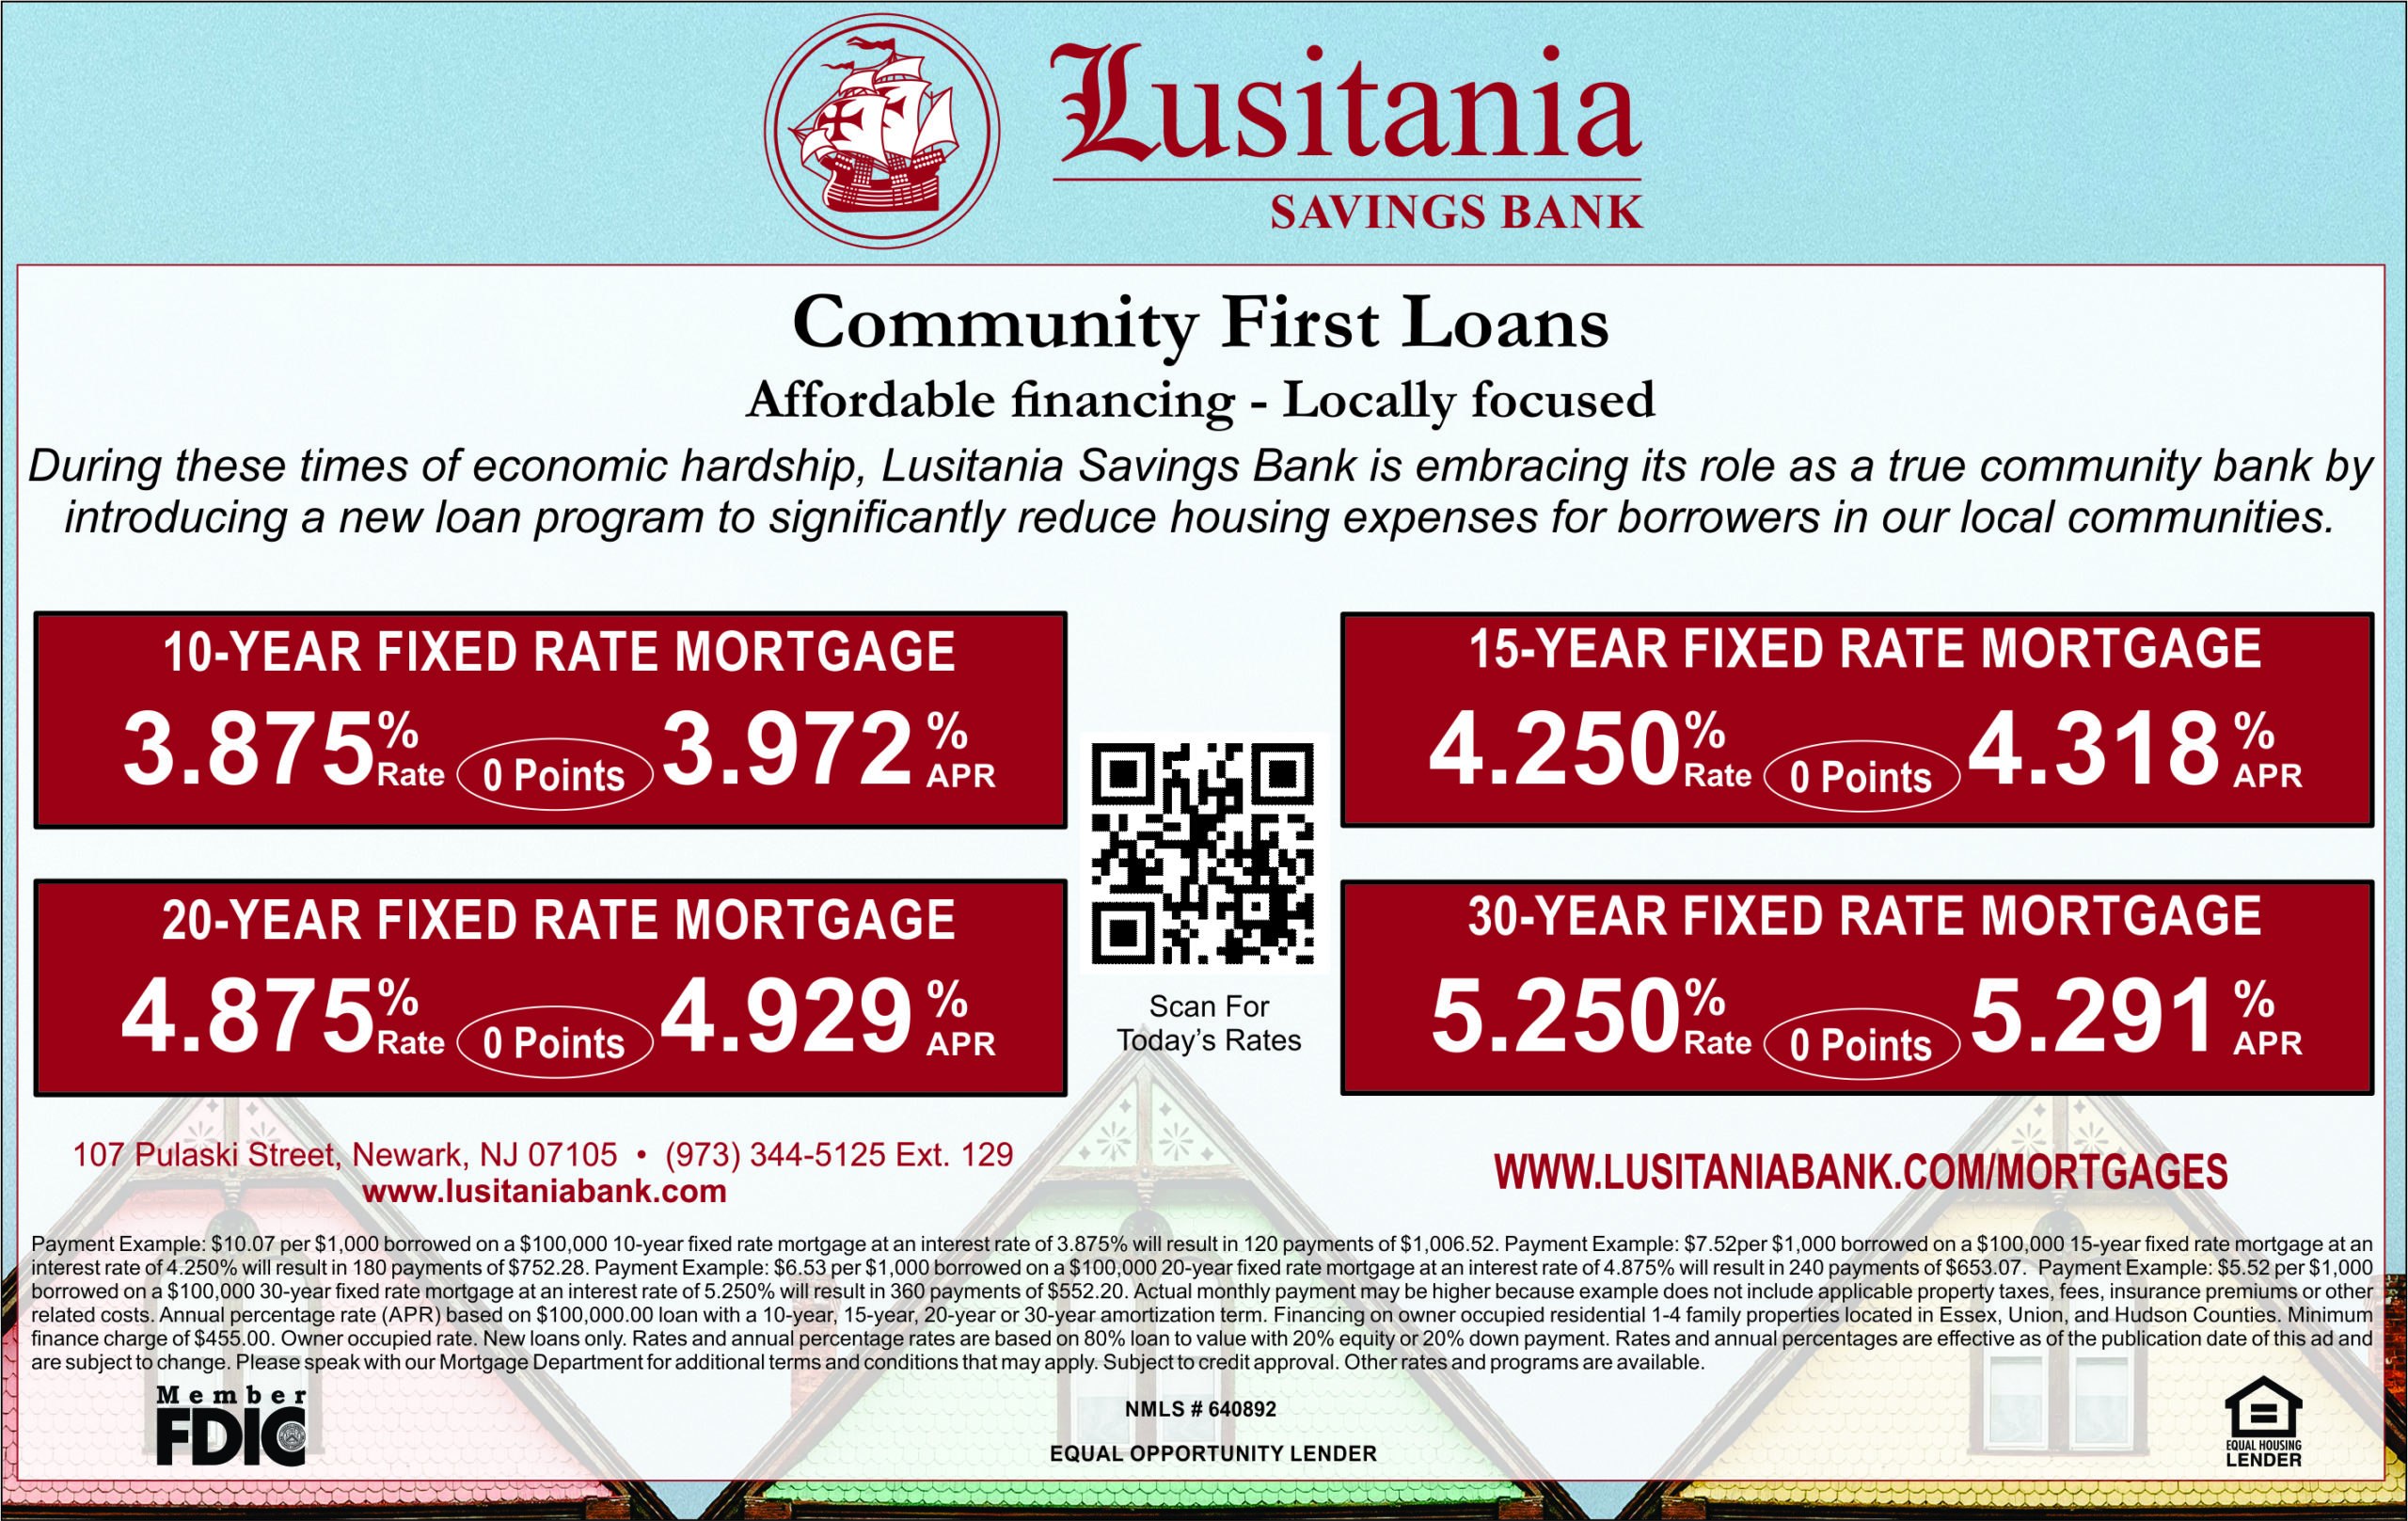 Community First Loans